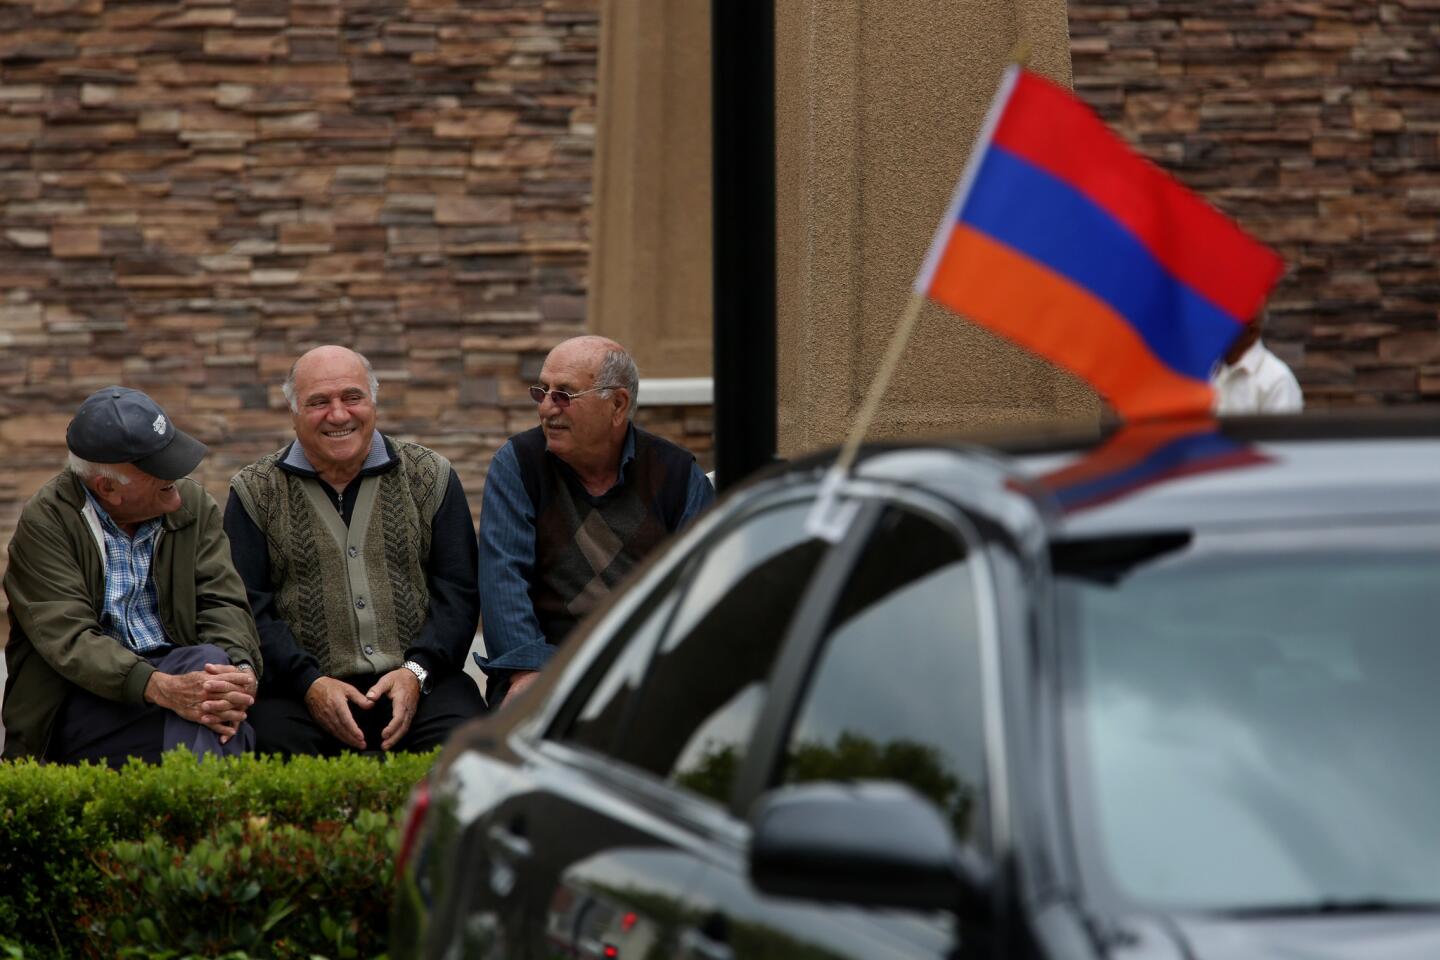 An Armenian flag flutters at the Adult Recreation Center in Glendale. The Armenian genocide took place from 1915 to 1918 under the Ottoman Empire. The Turkish government disputes that a genocide took place.